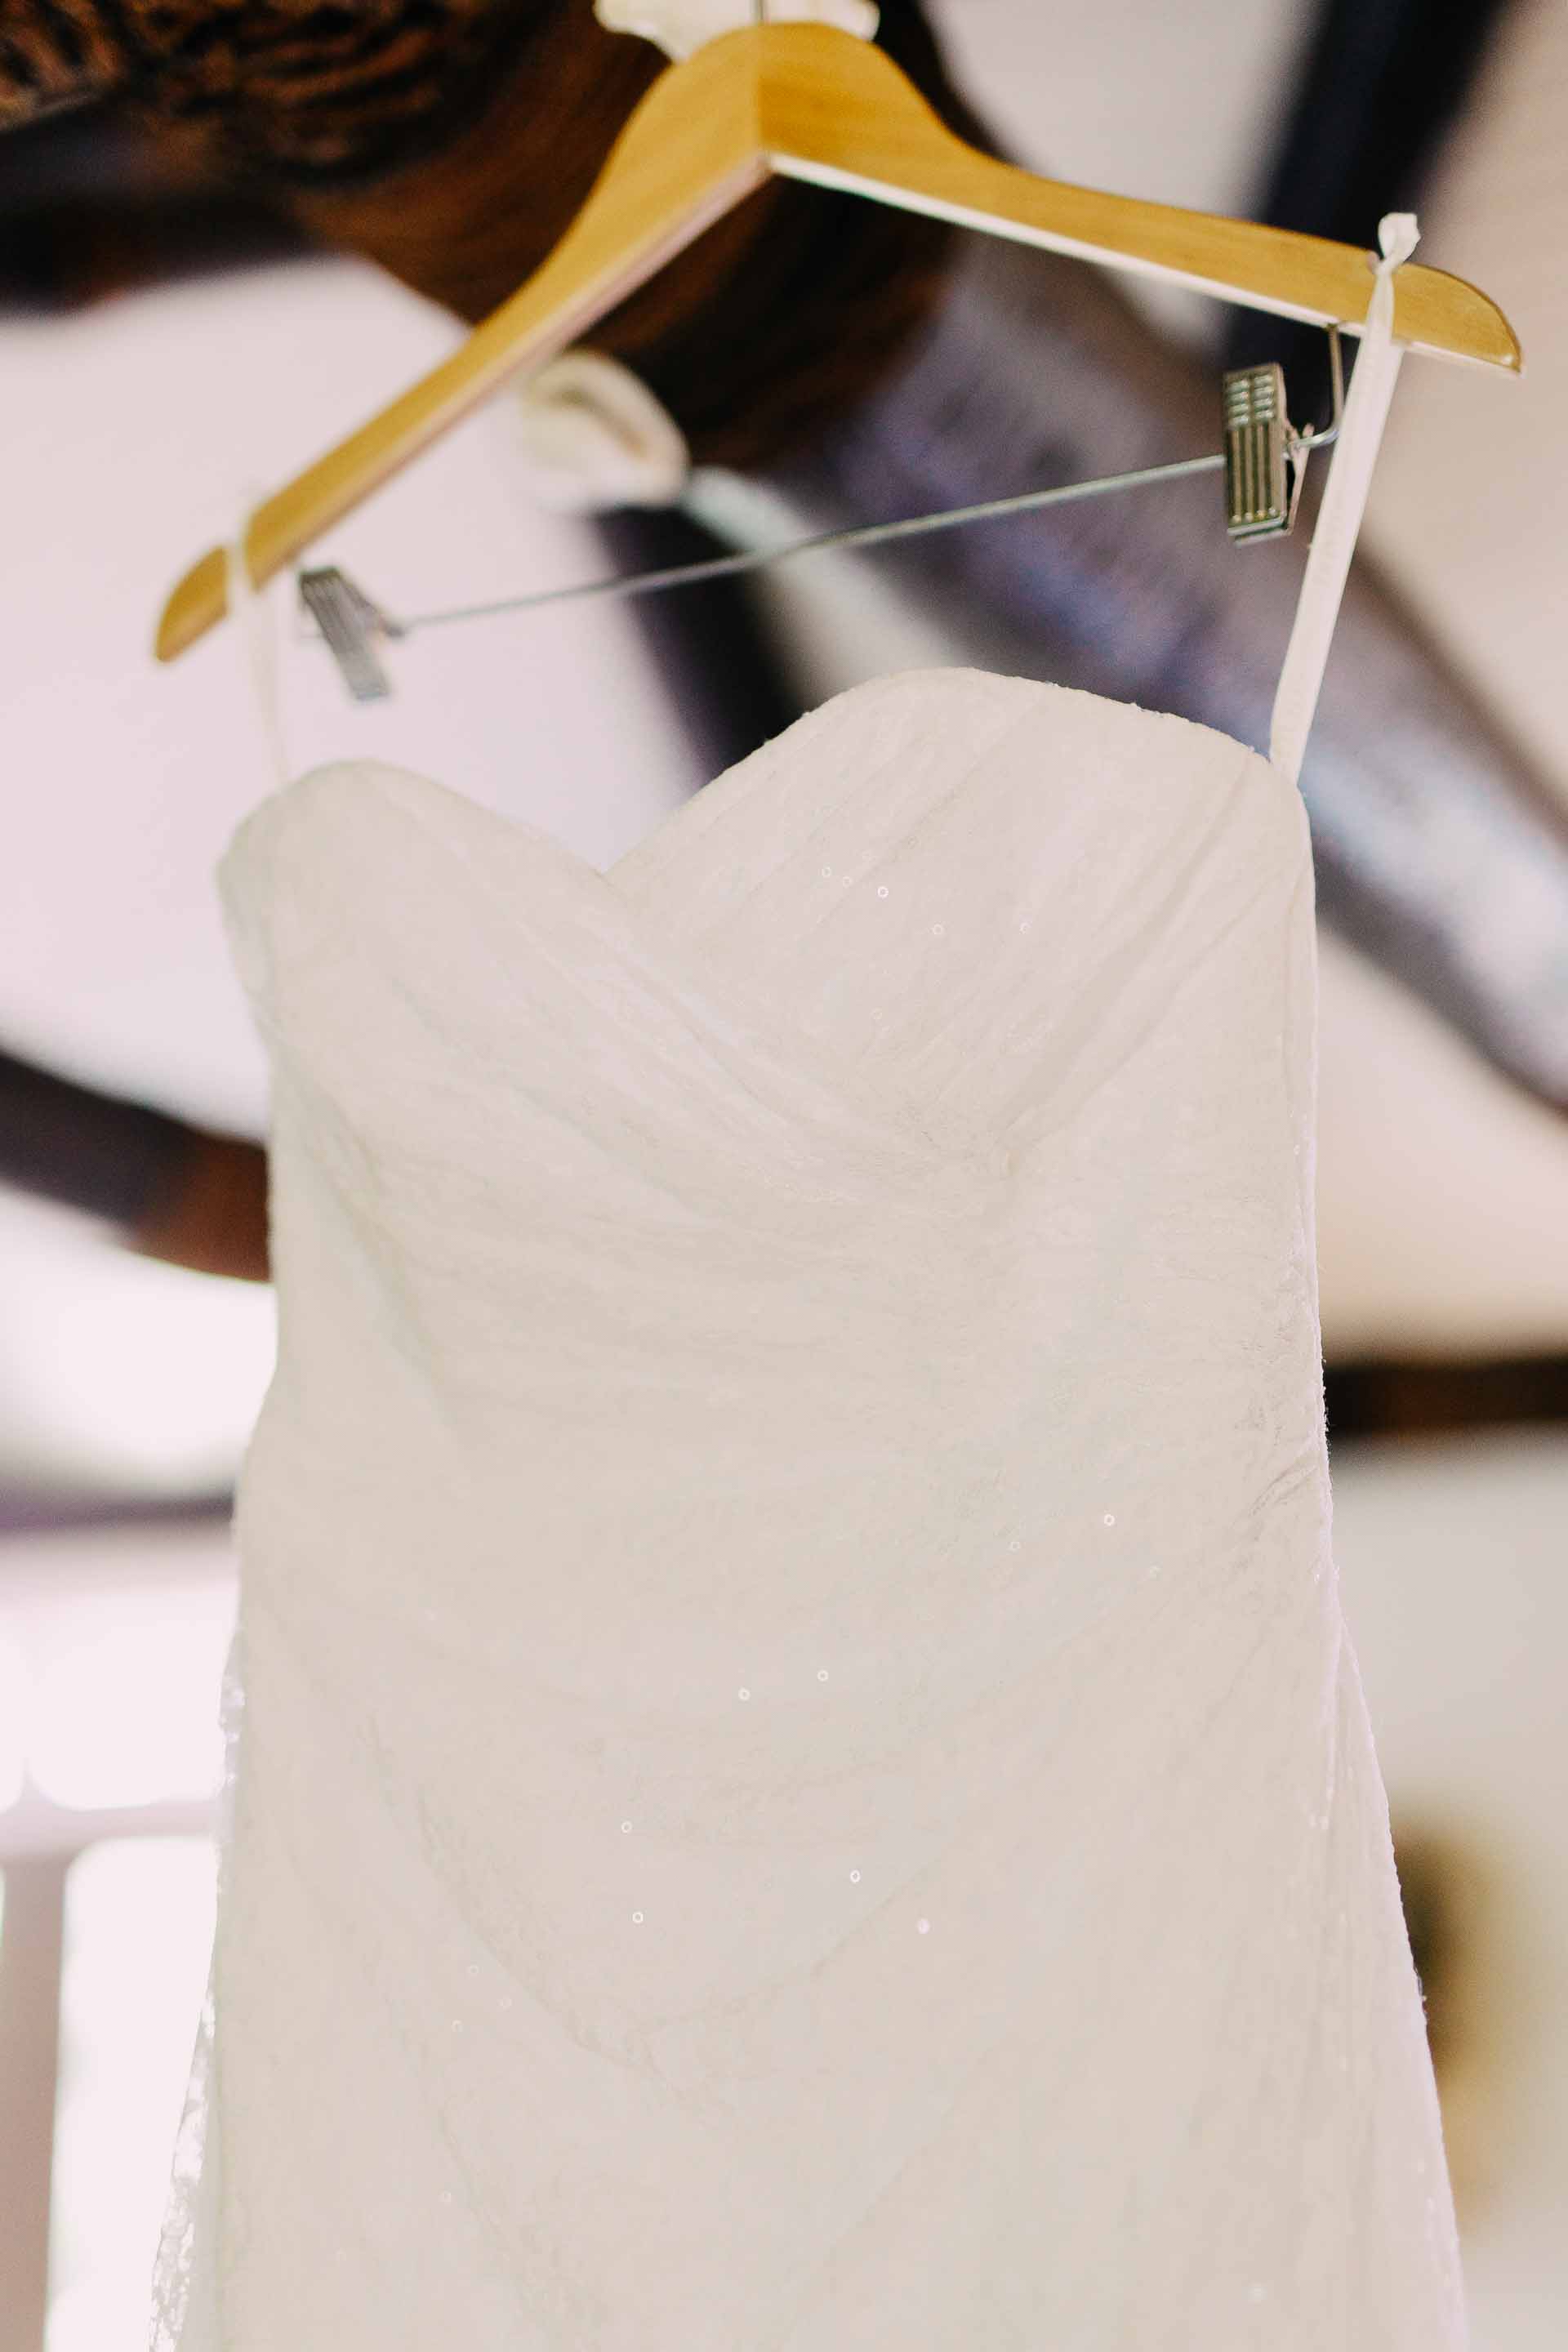 the brides dress hanging from a beam on a wooden hanger